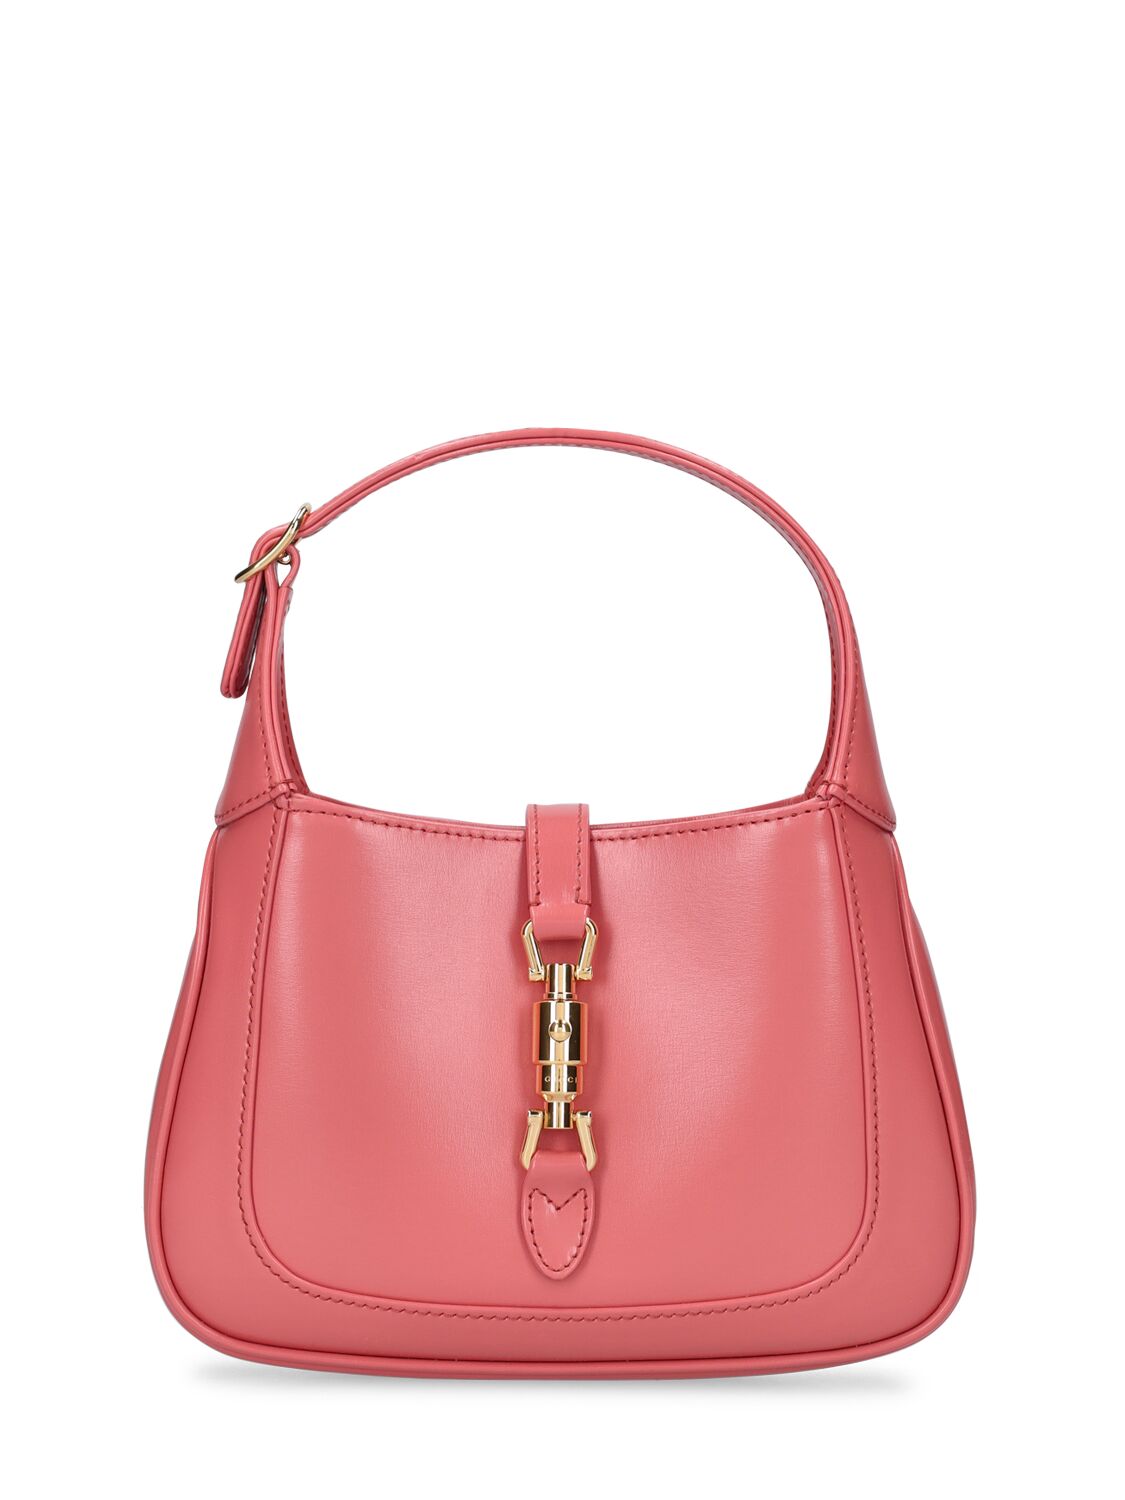 Jackie 1961 Mini Hobo Bag In Red Leather